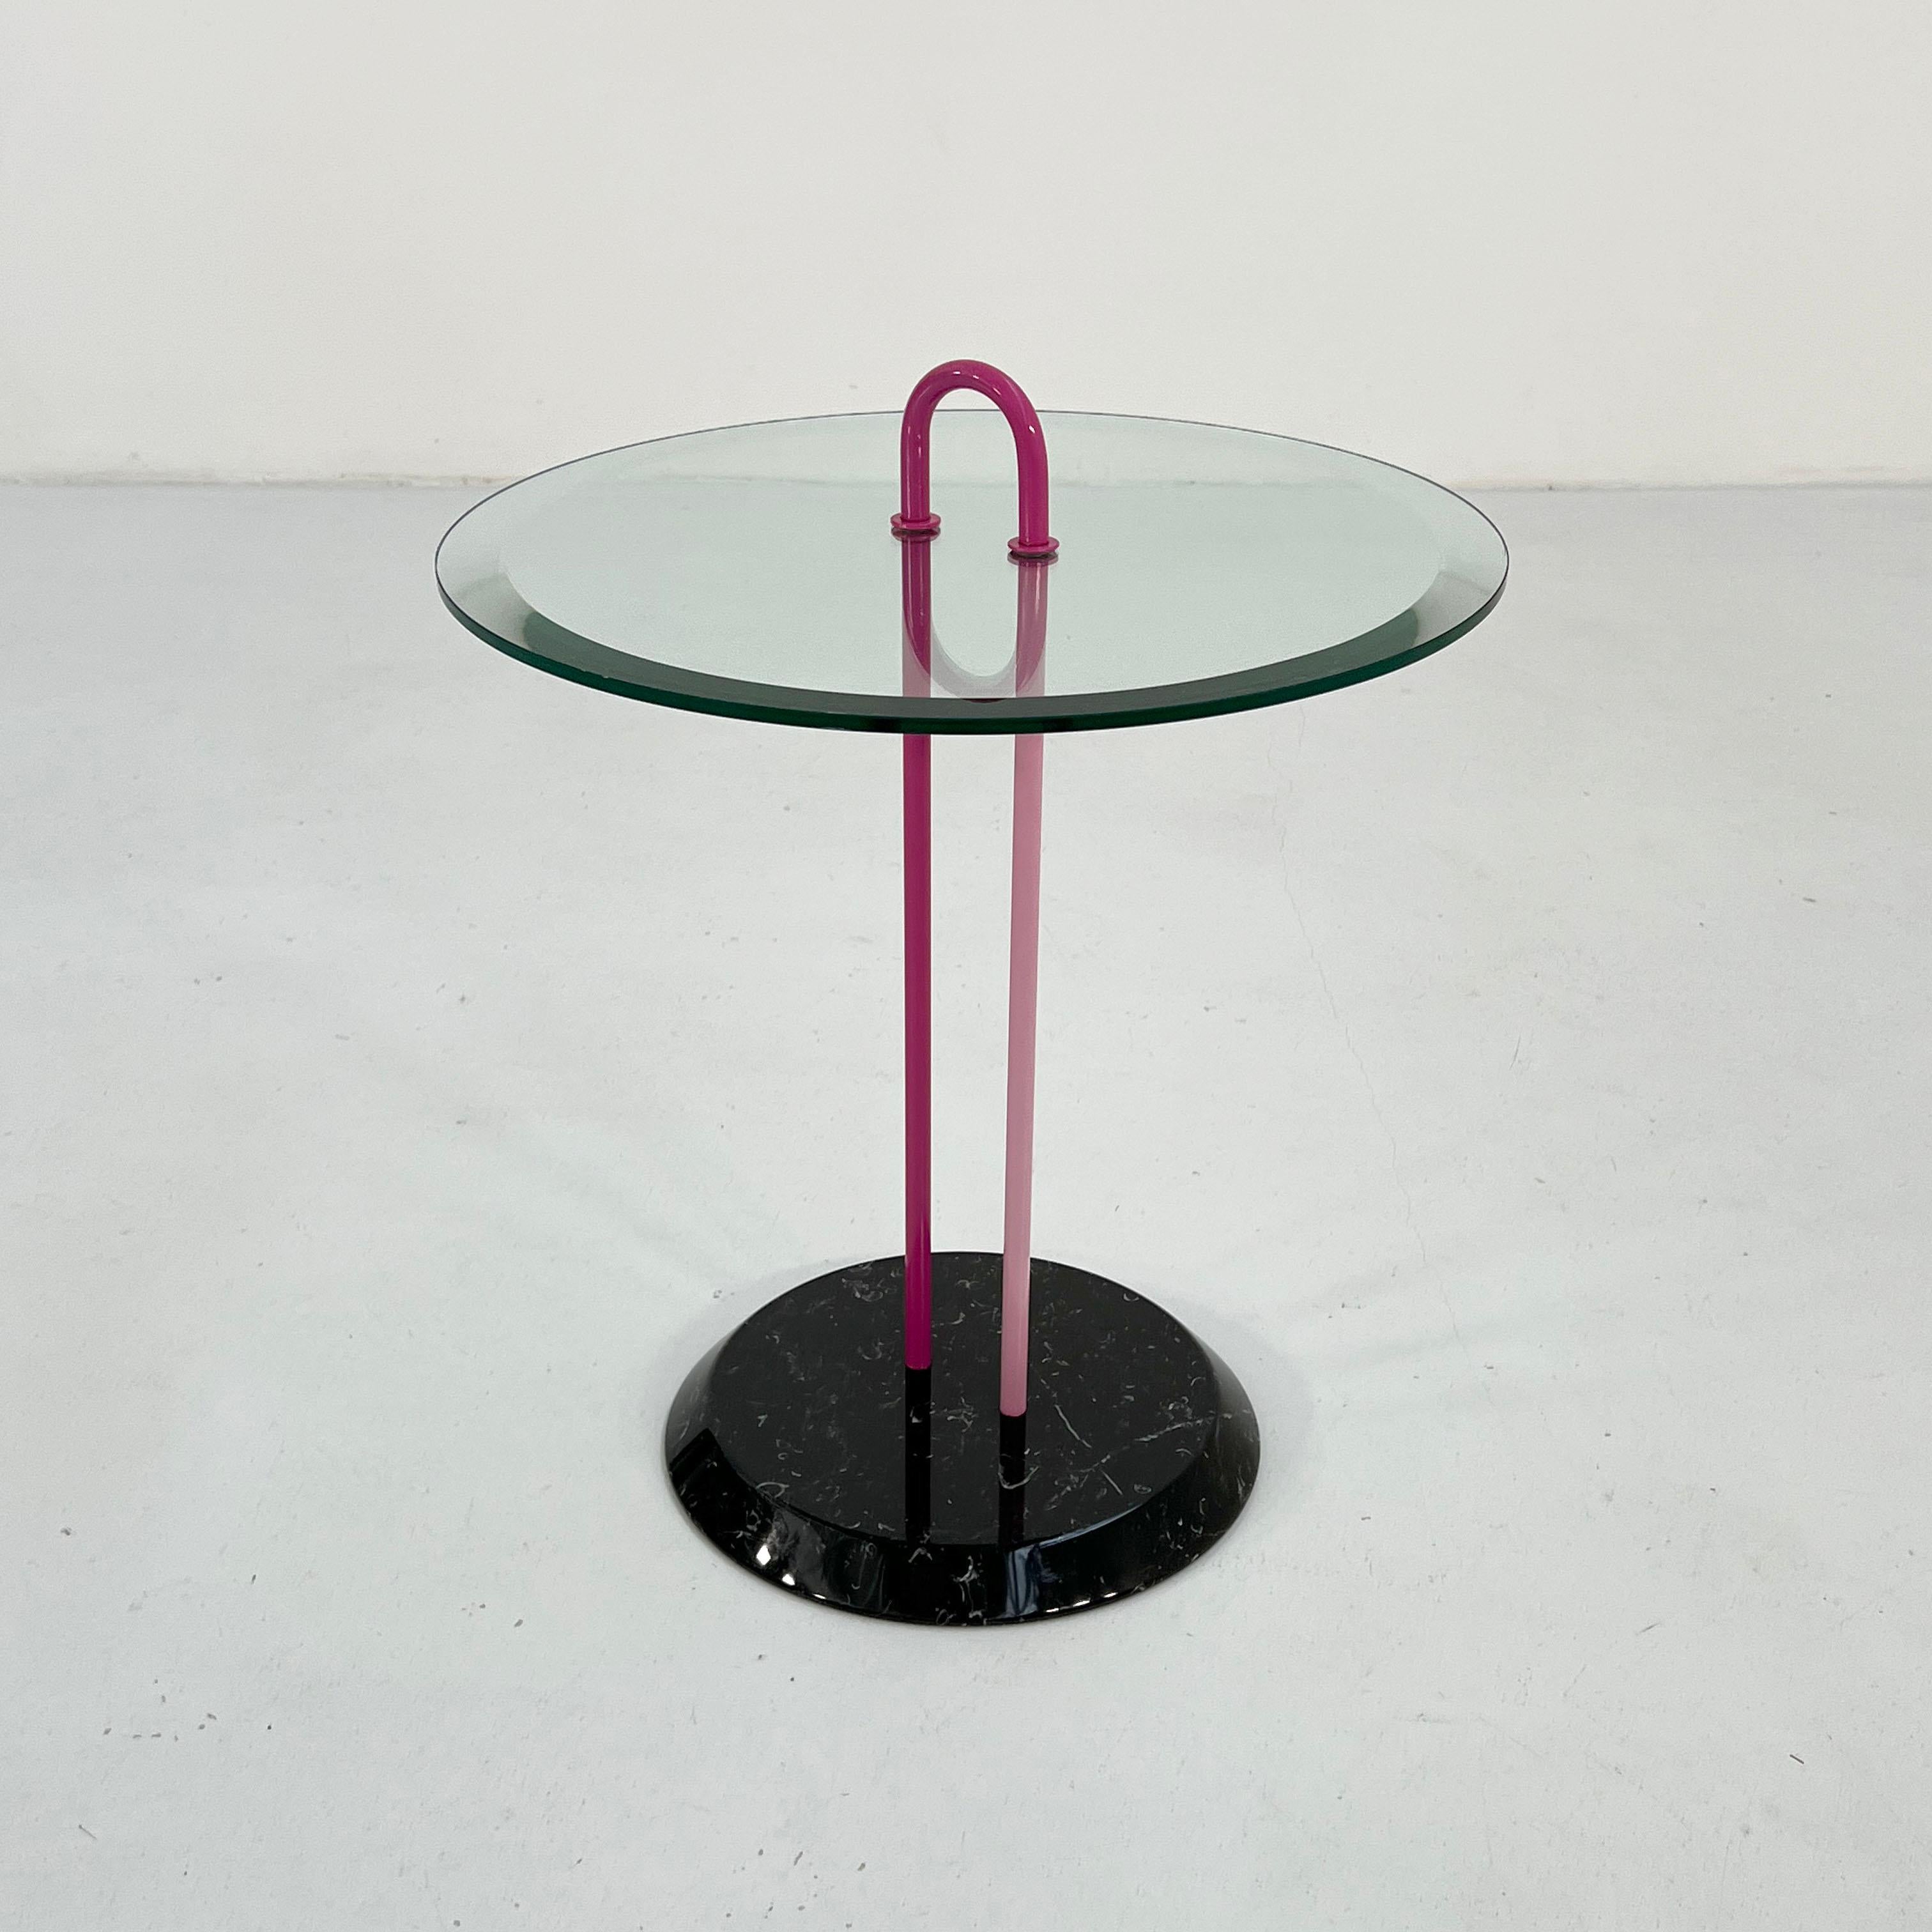 Pink Glass and Marble Side Table by Vico Magistretti for Cattelan Italy, 1980s

Designer - Vico Magistretti
Producer -  Cattelan Italy
Design Period - Eighties
Measurements - Width 50 cm x Depth 50 cm x Height 60 cm
Materials - Glass, Metal,